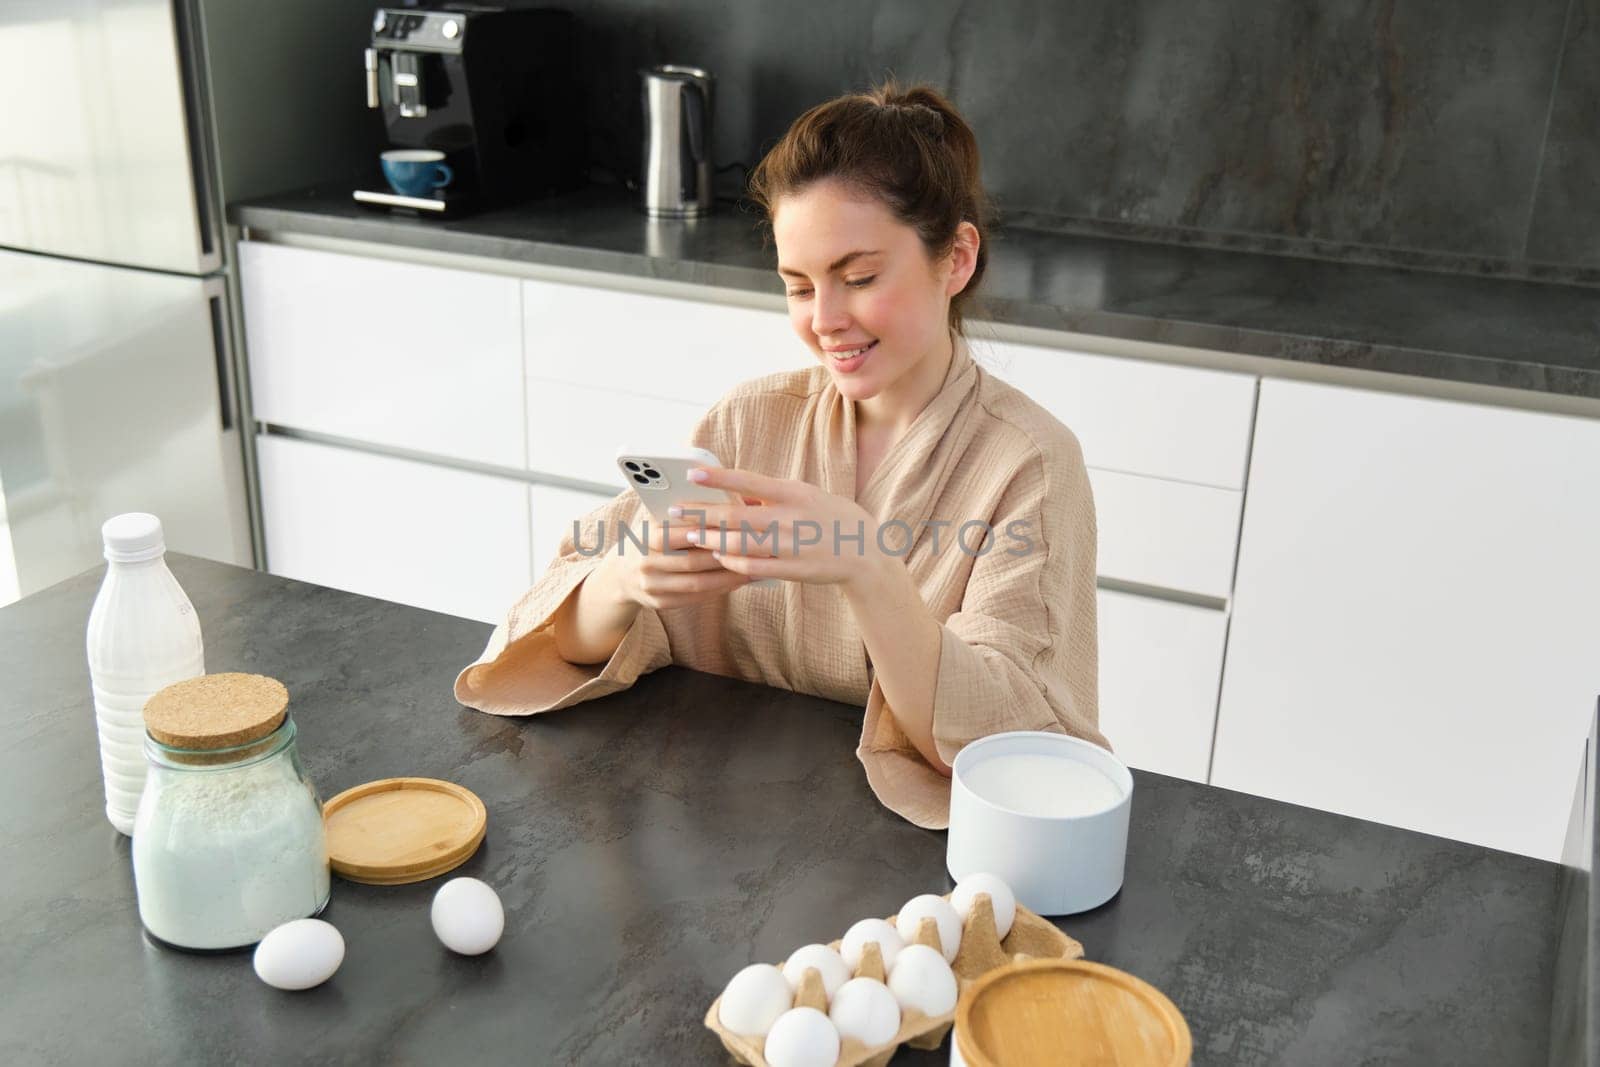 Attractive young cheerful girl baking at the kitchen, making dough, holding recipe book, having ideas.